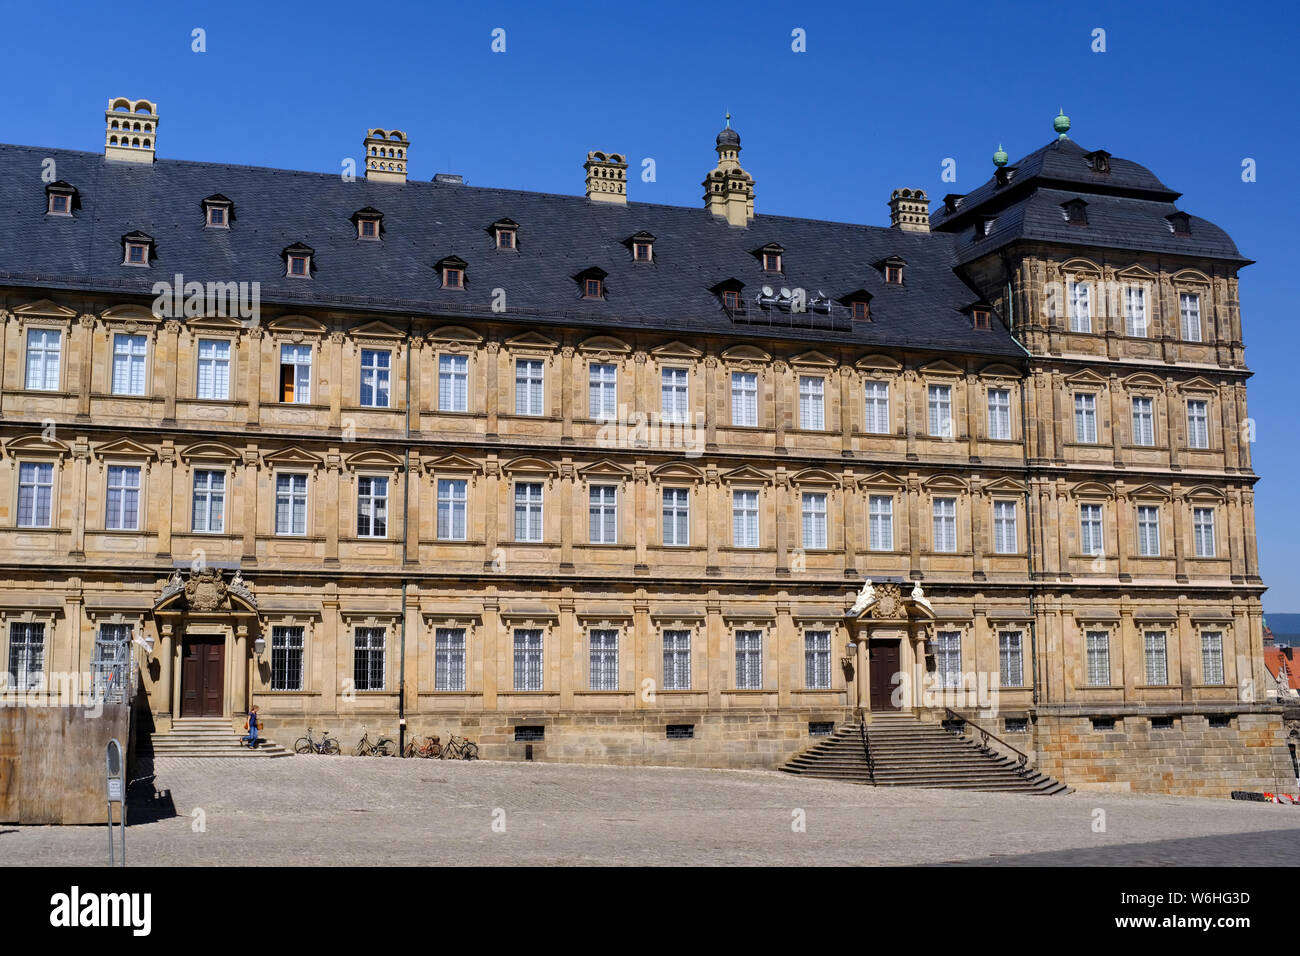 The New Residence in Bamberg, Germany Stock Photo